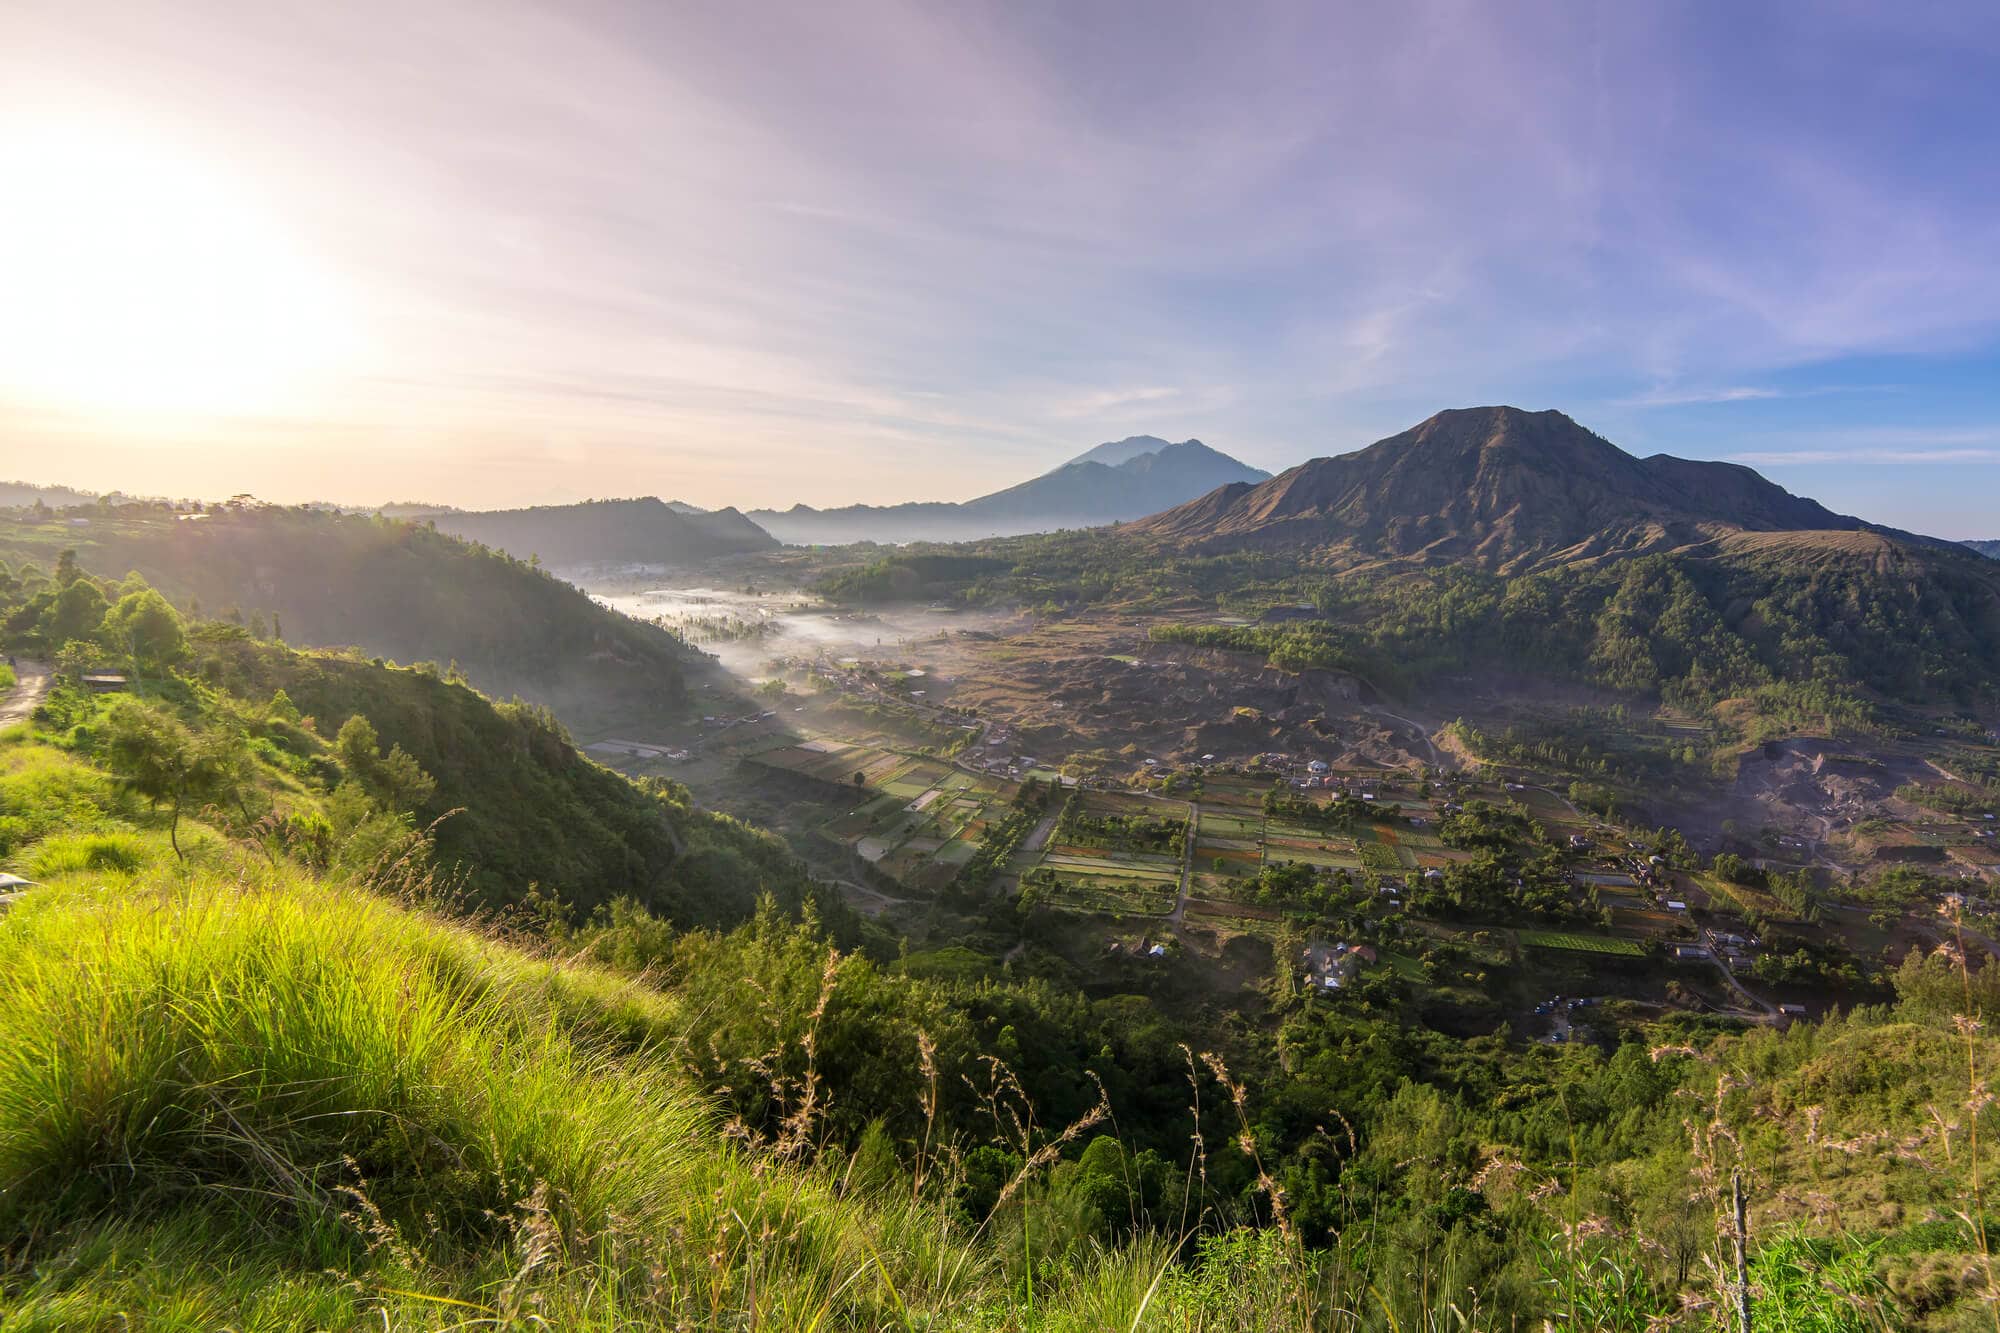 Pinggan Village - Discover one of Bali's best sunrise viewpoints